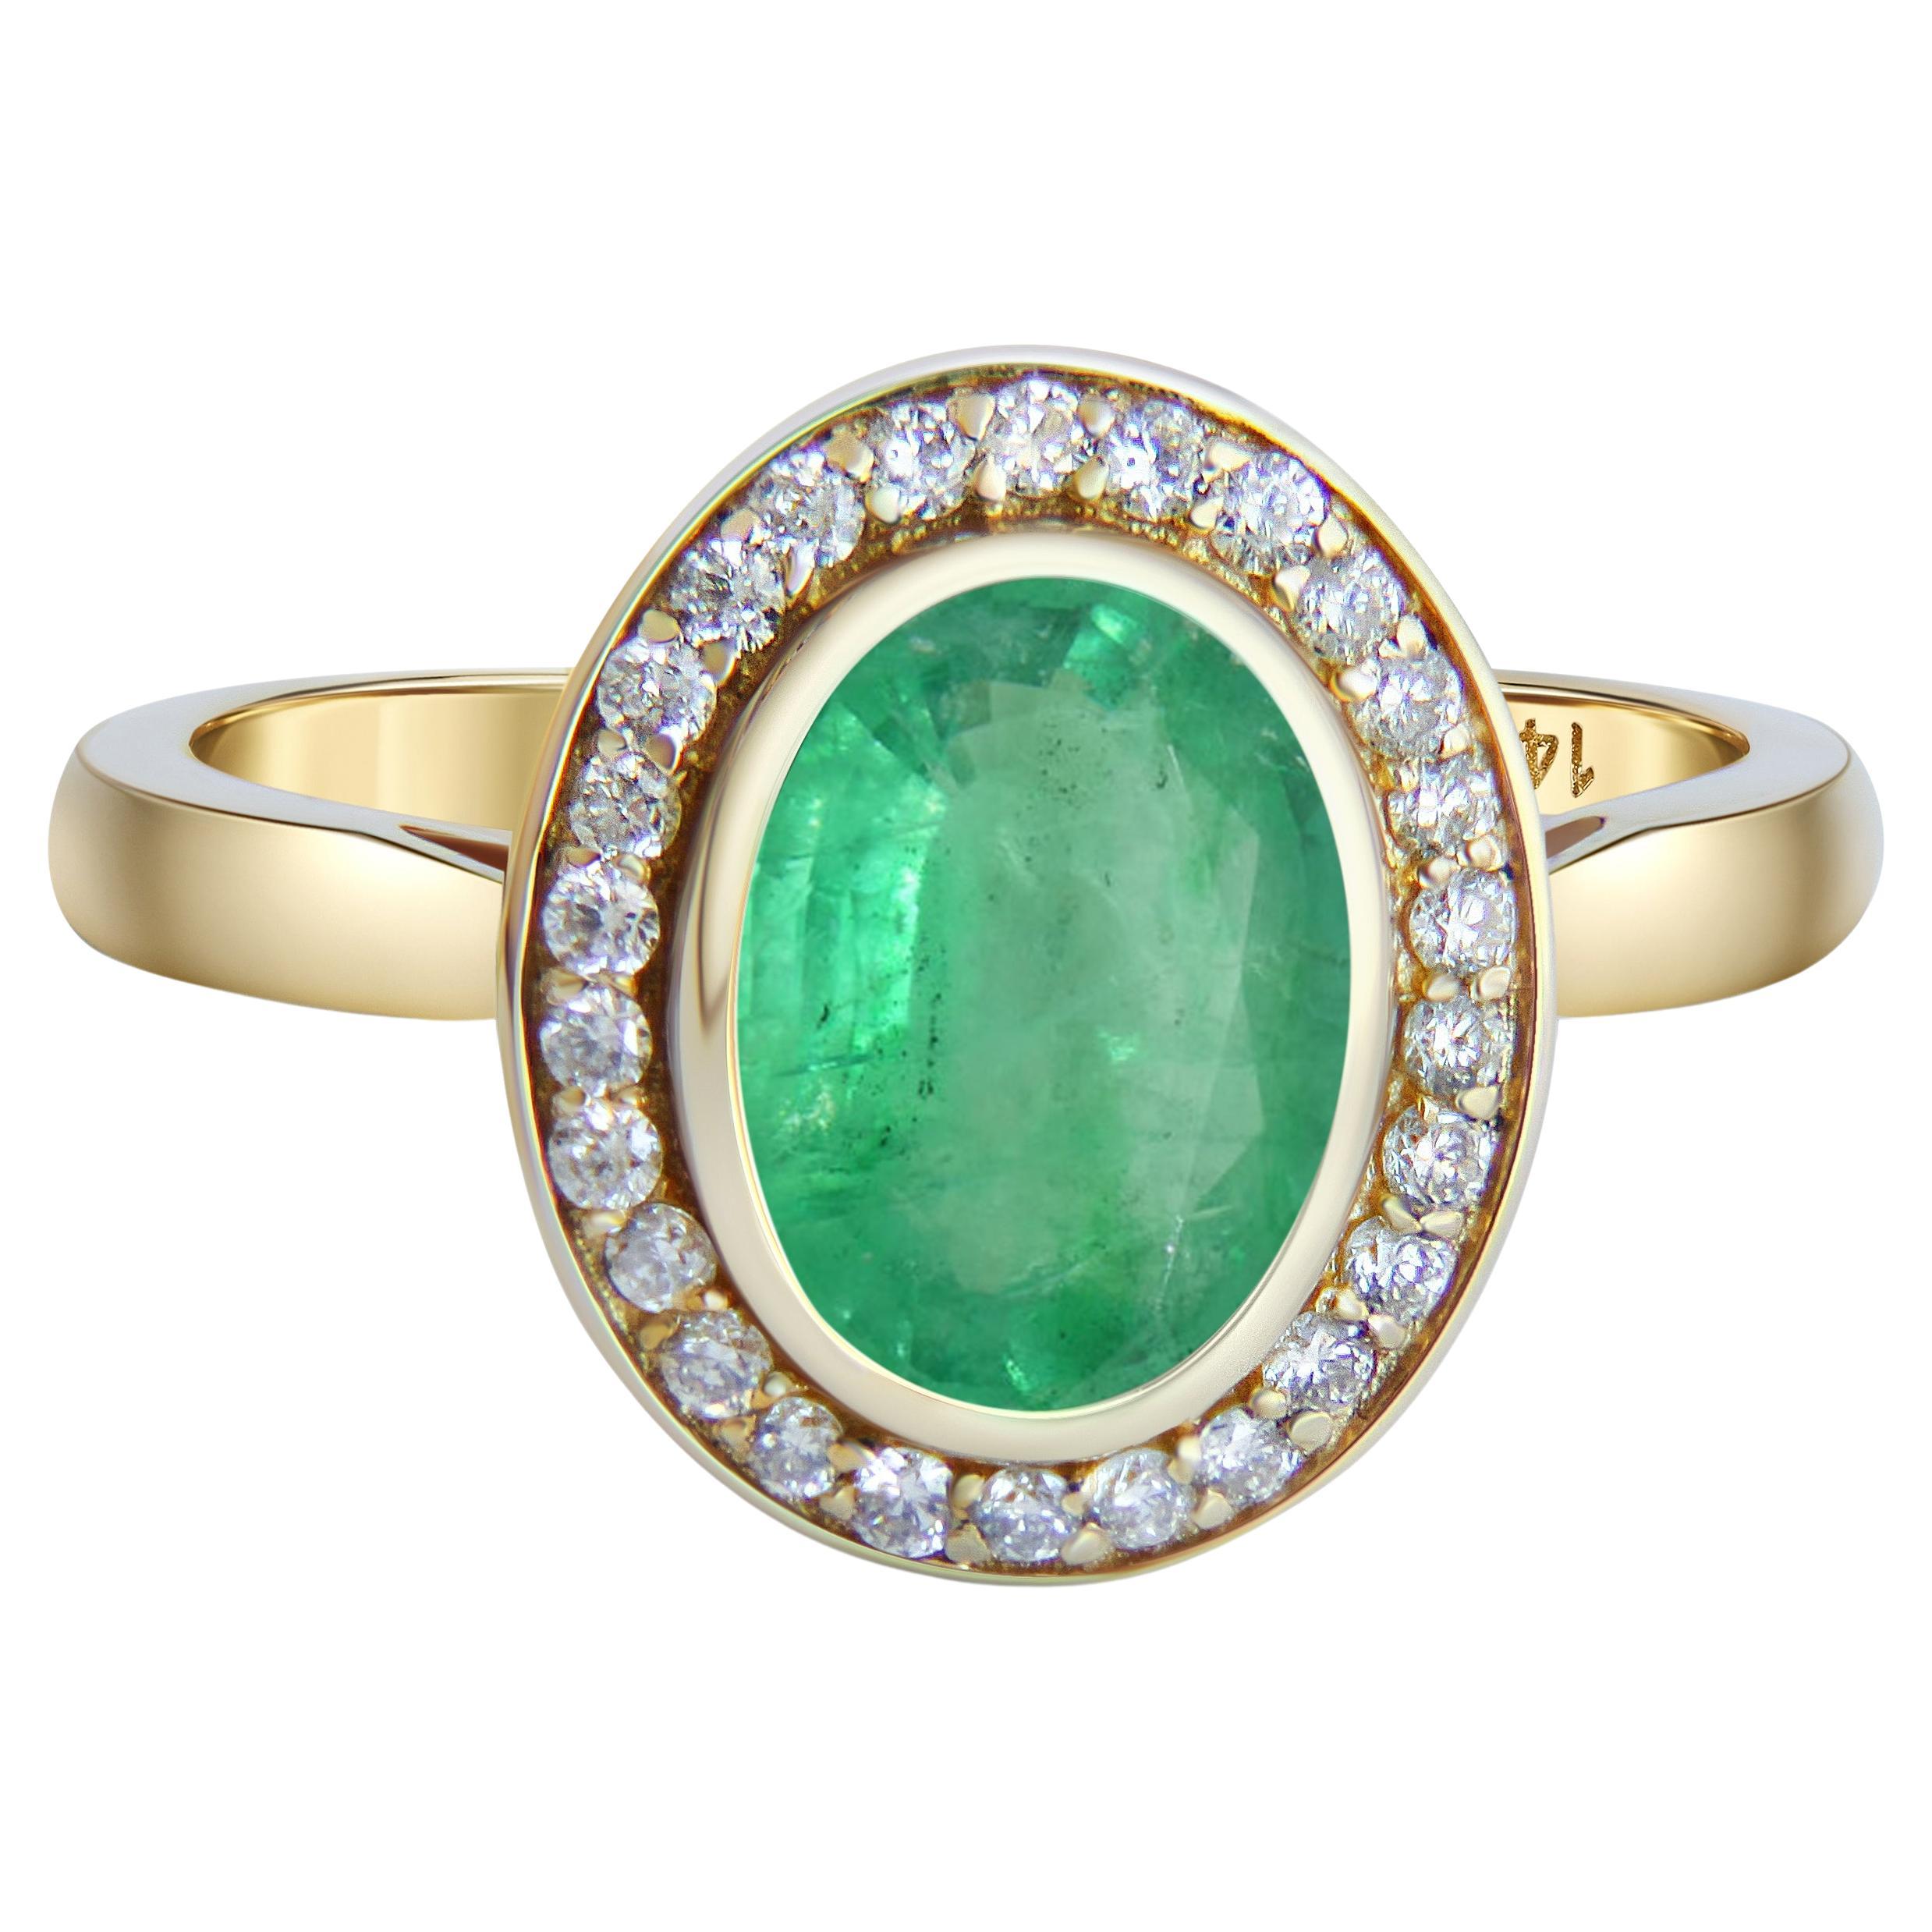 For Sale:  Emerald and diamonds 14k gold ring.